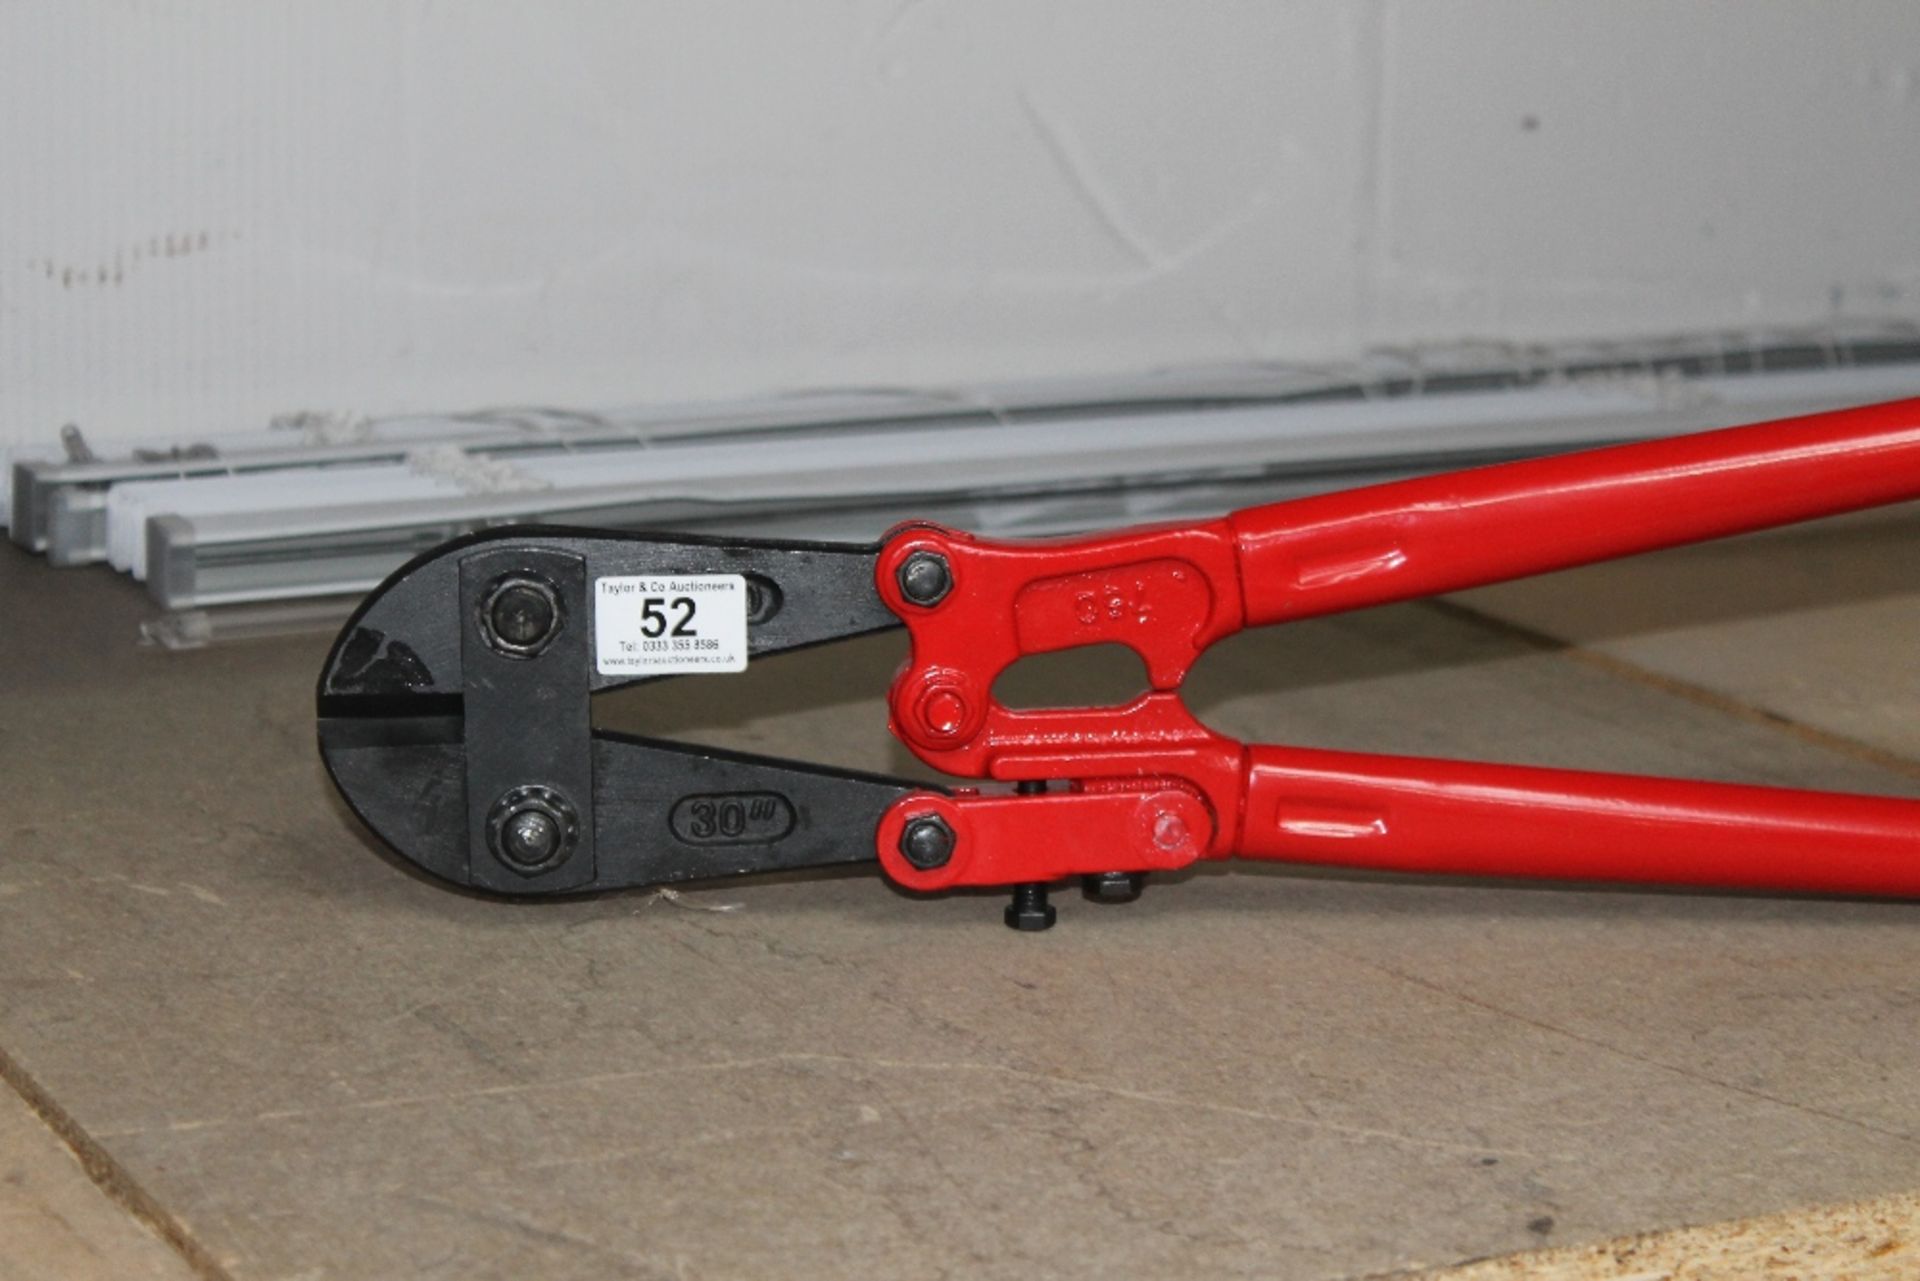 30” Bolt Croppers